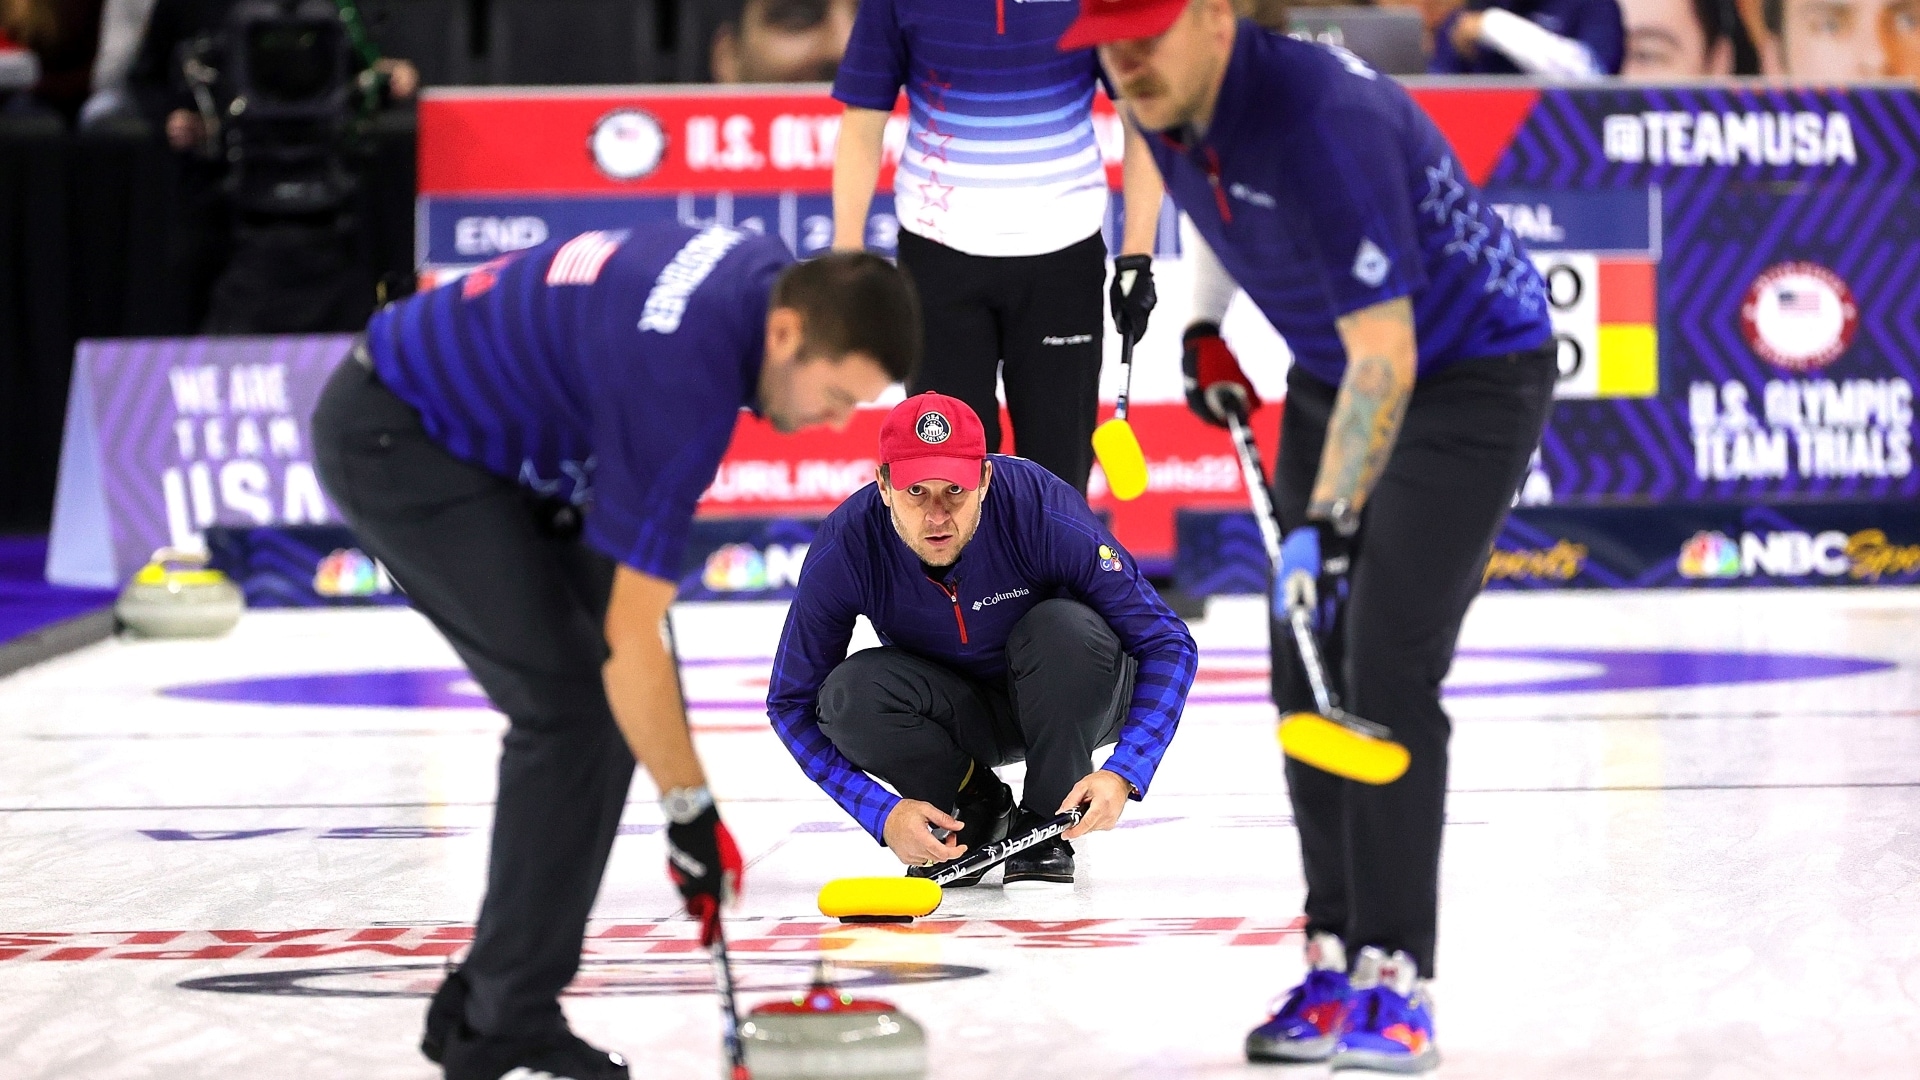 With pressure off, US mens curling team relishing title defense